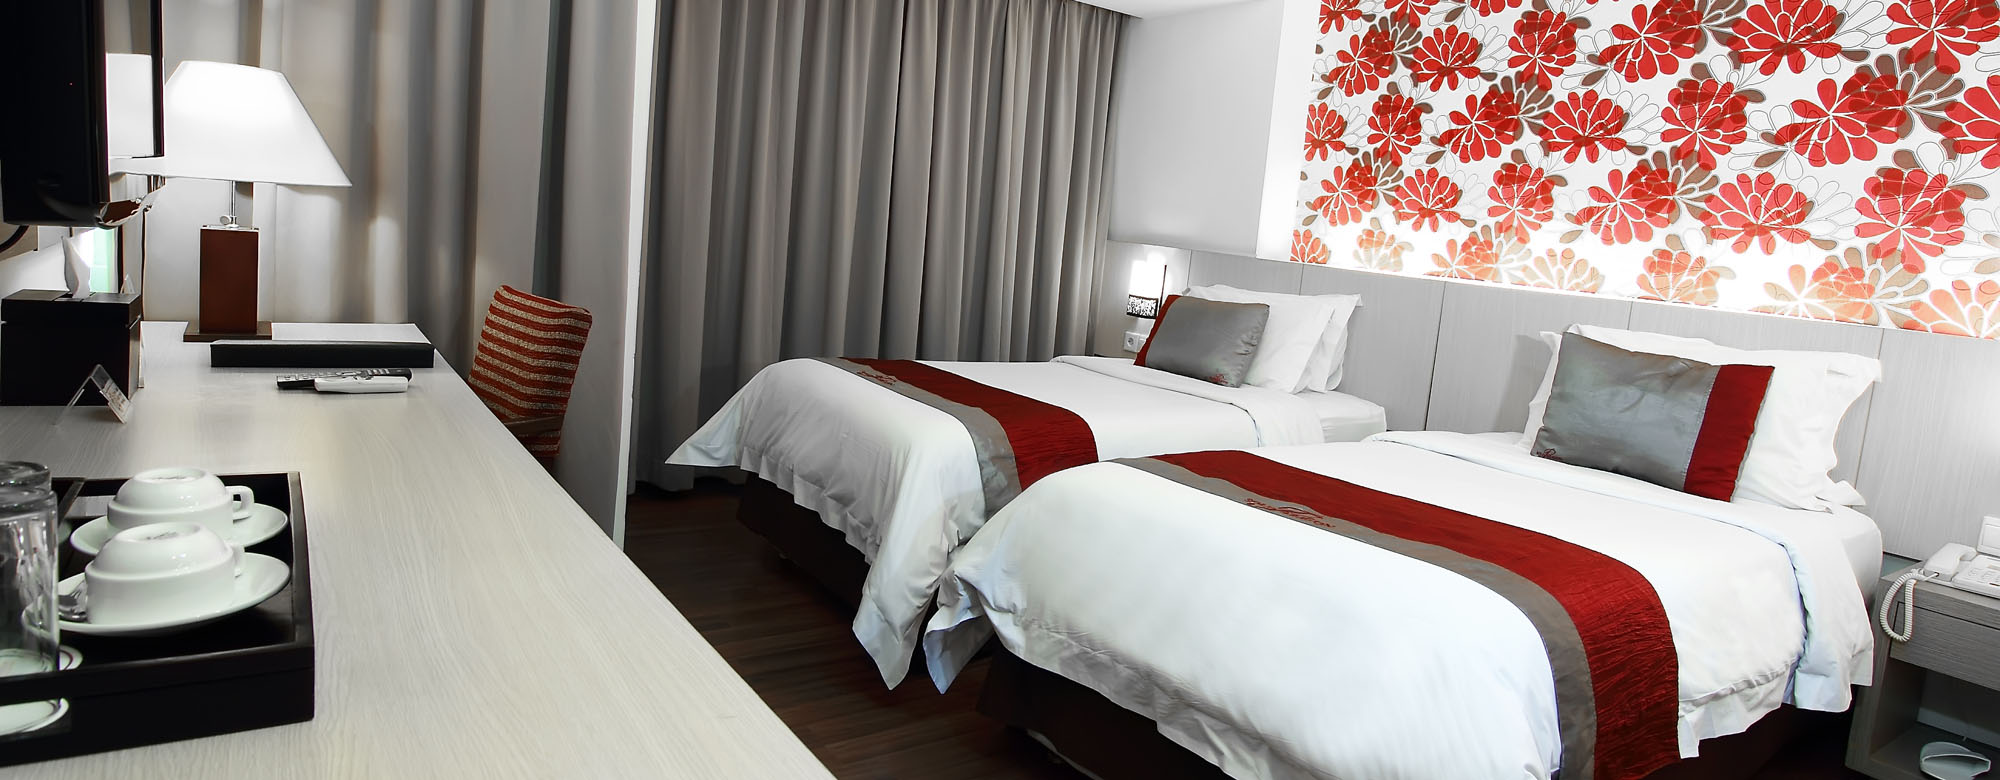 Rooms Solo Paragon Hotel & Residences